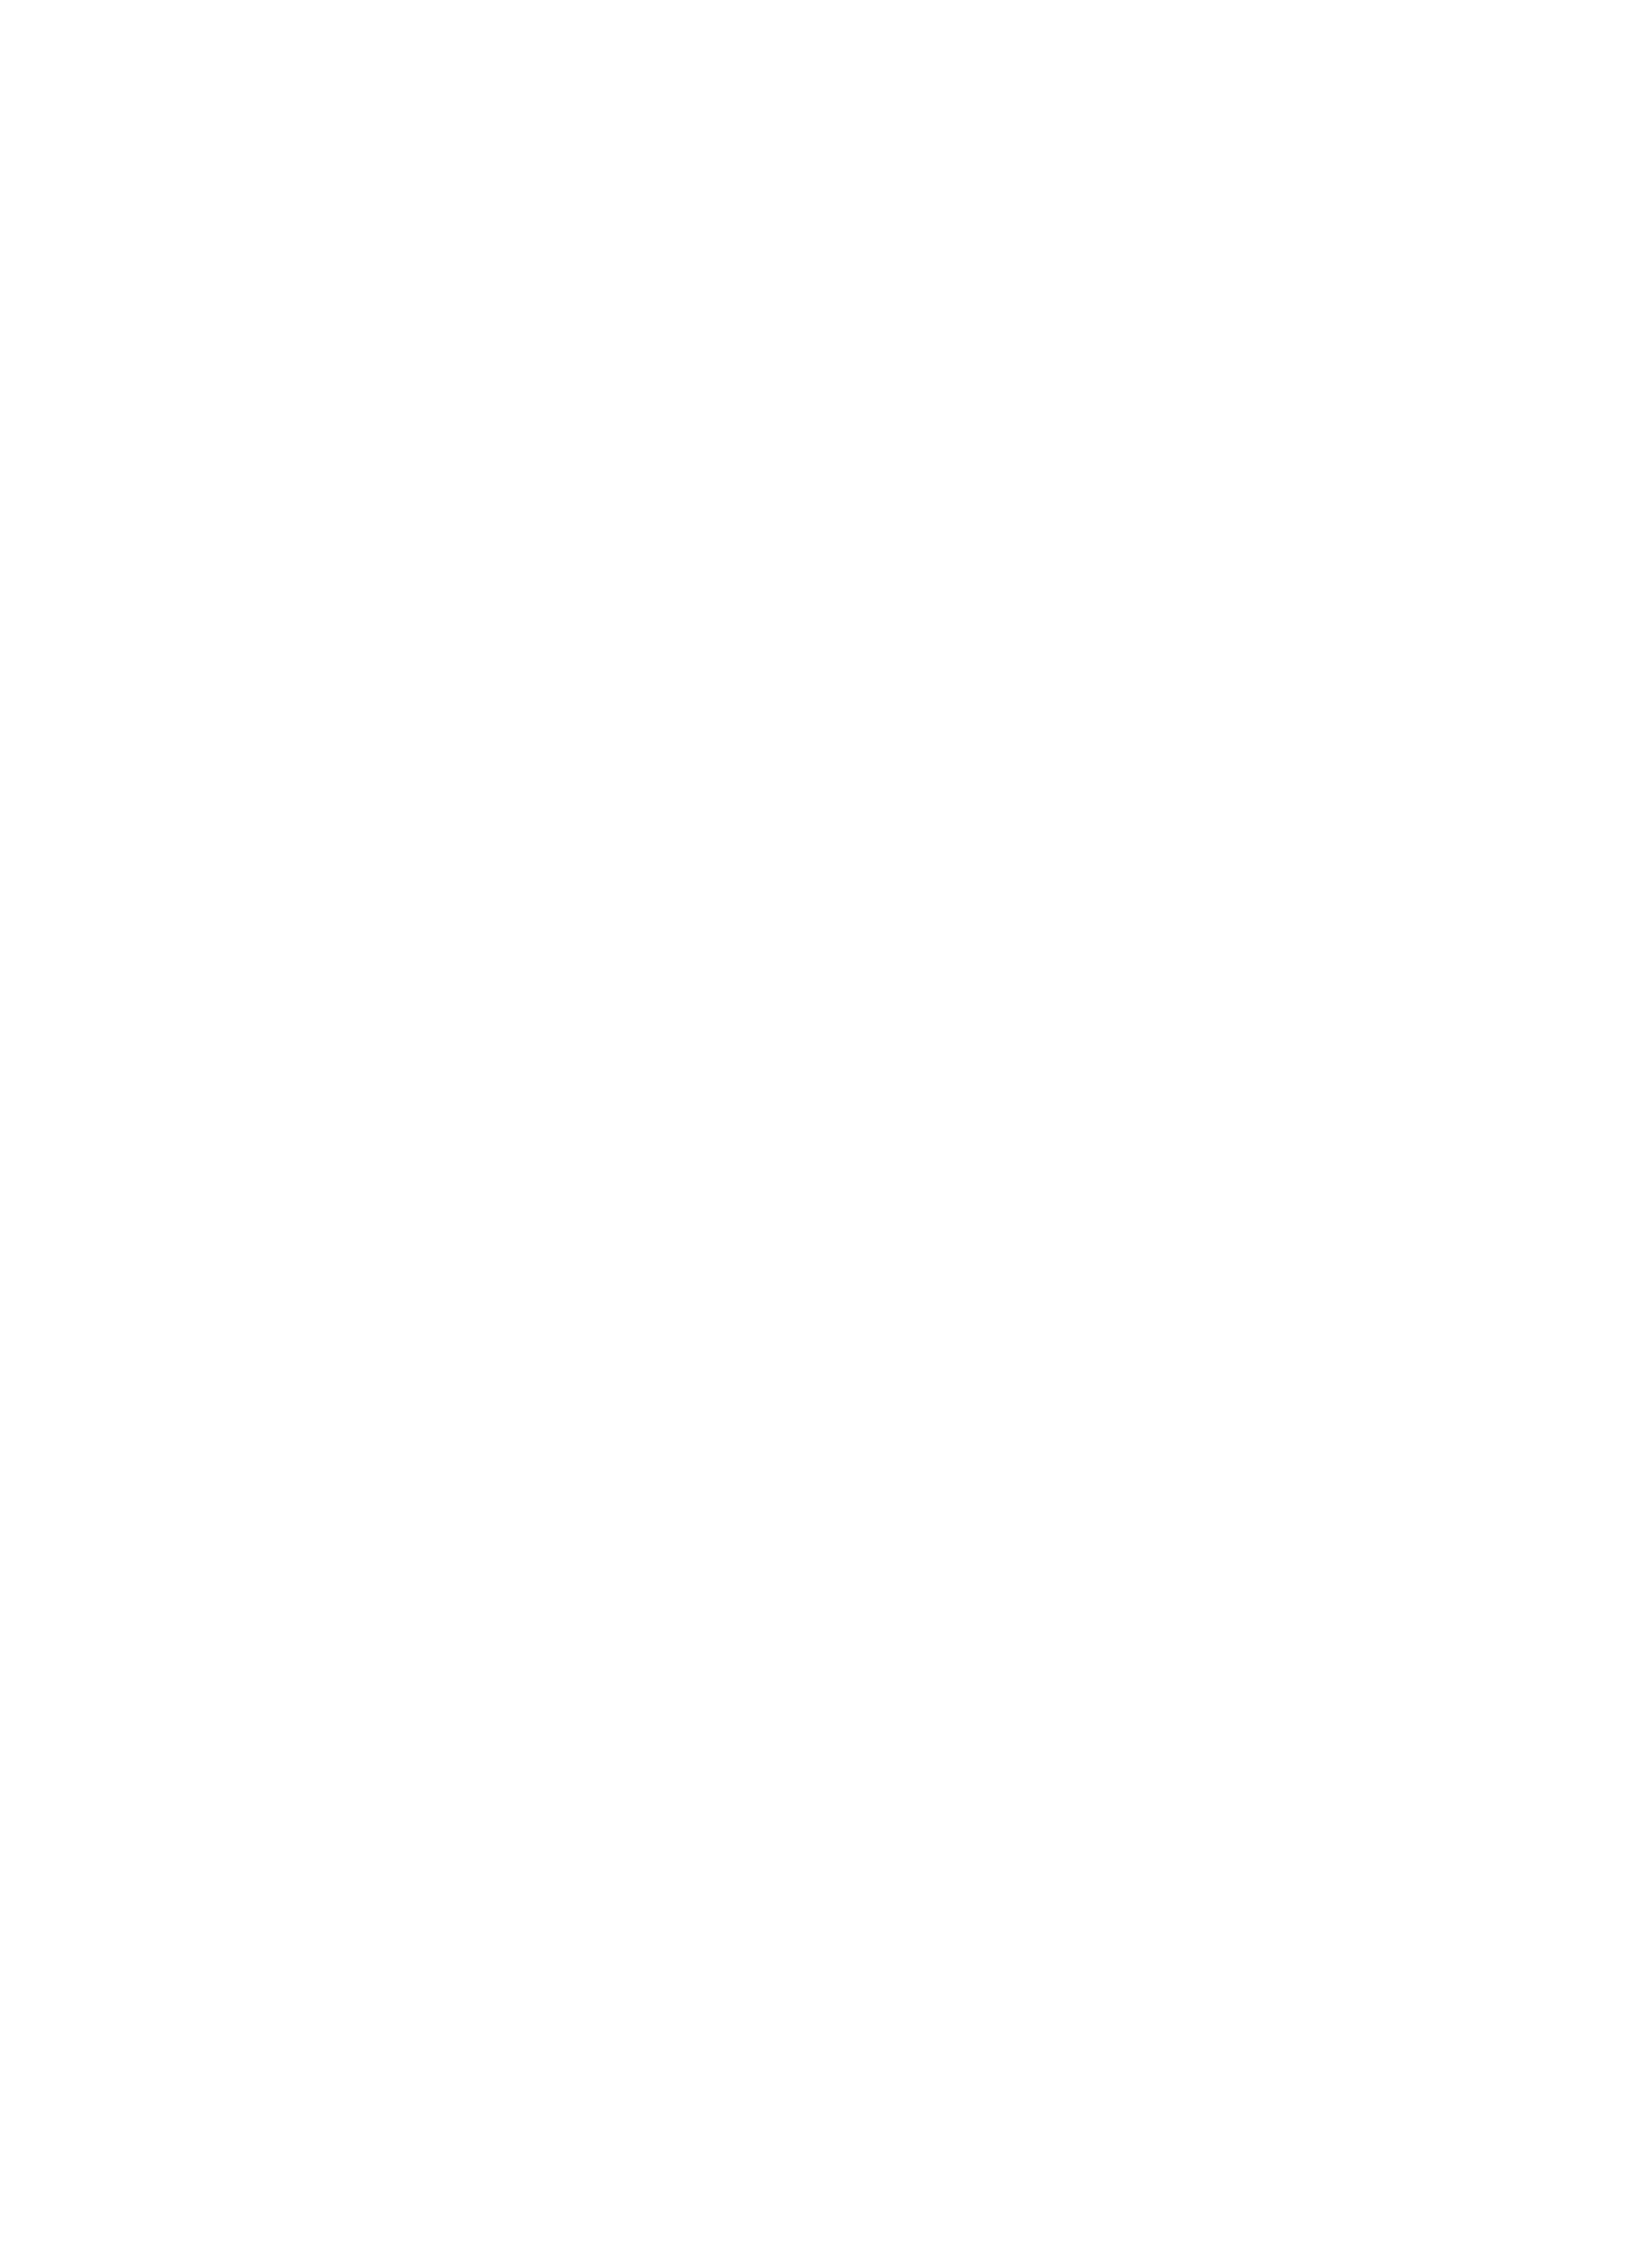 At Most Fear